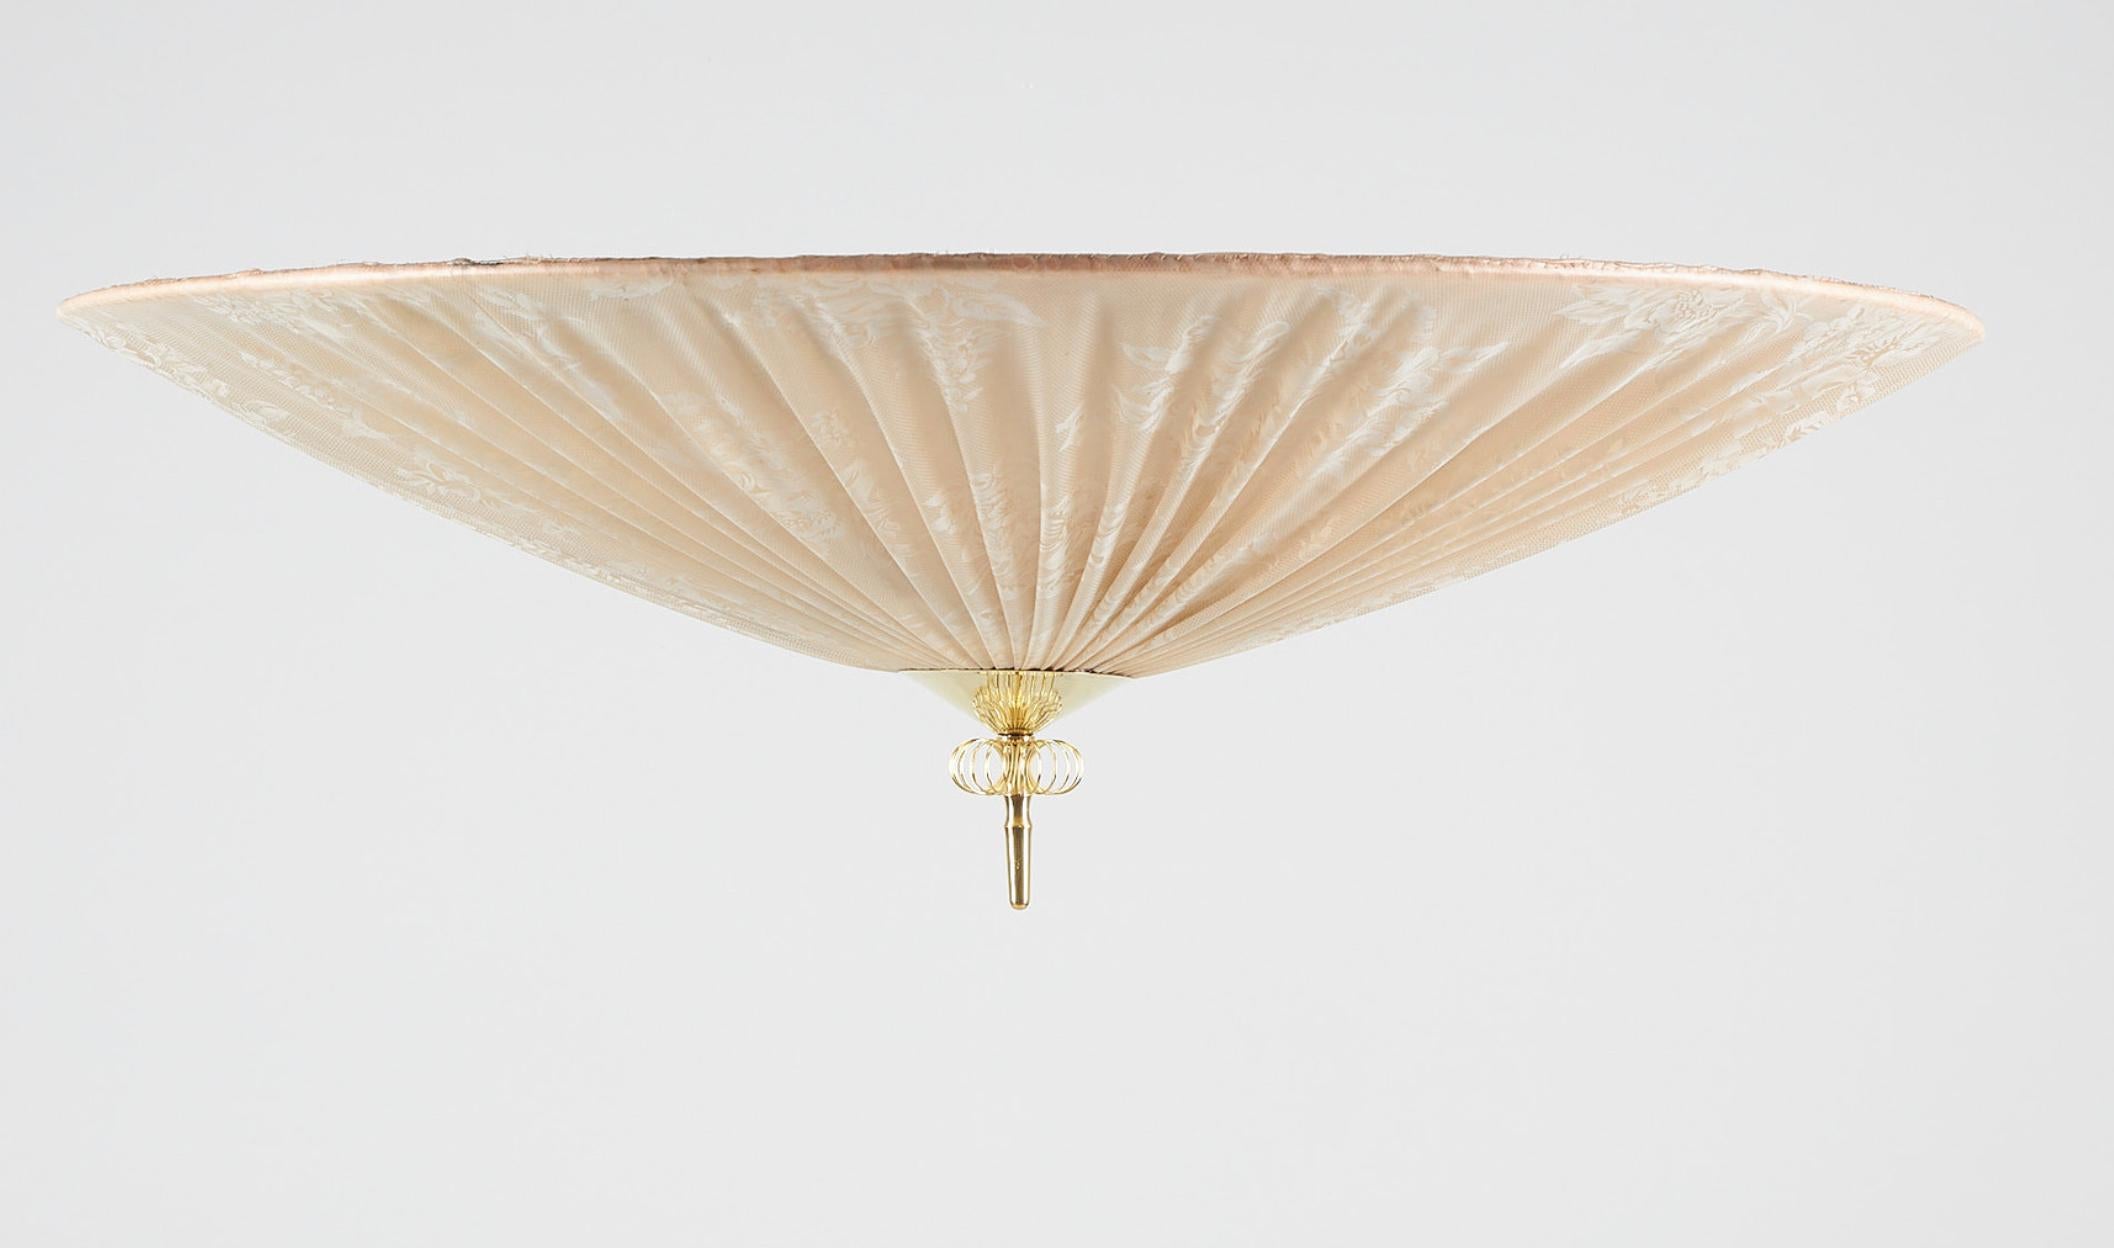 Large, flush mount ceiling light by Paavo Tynell for Idman, Model “1076”. Circa 1950th.

Polished brass and pleated plastic lampshade. Four points of light. Diameter 32